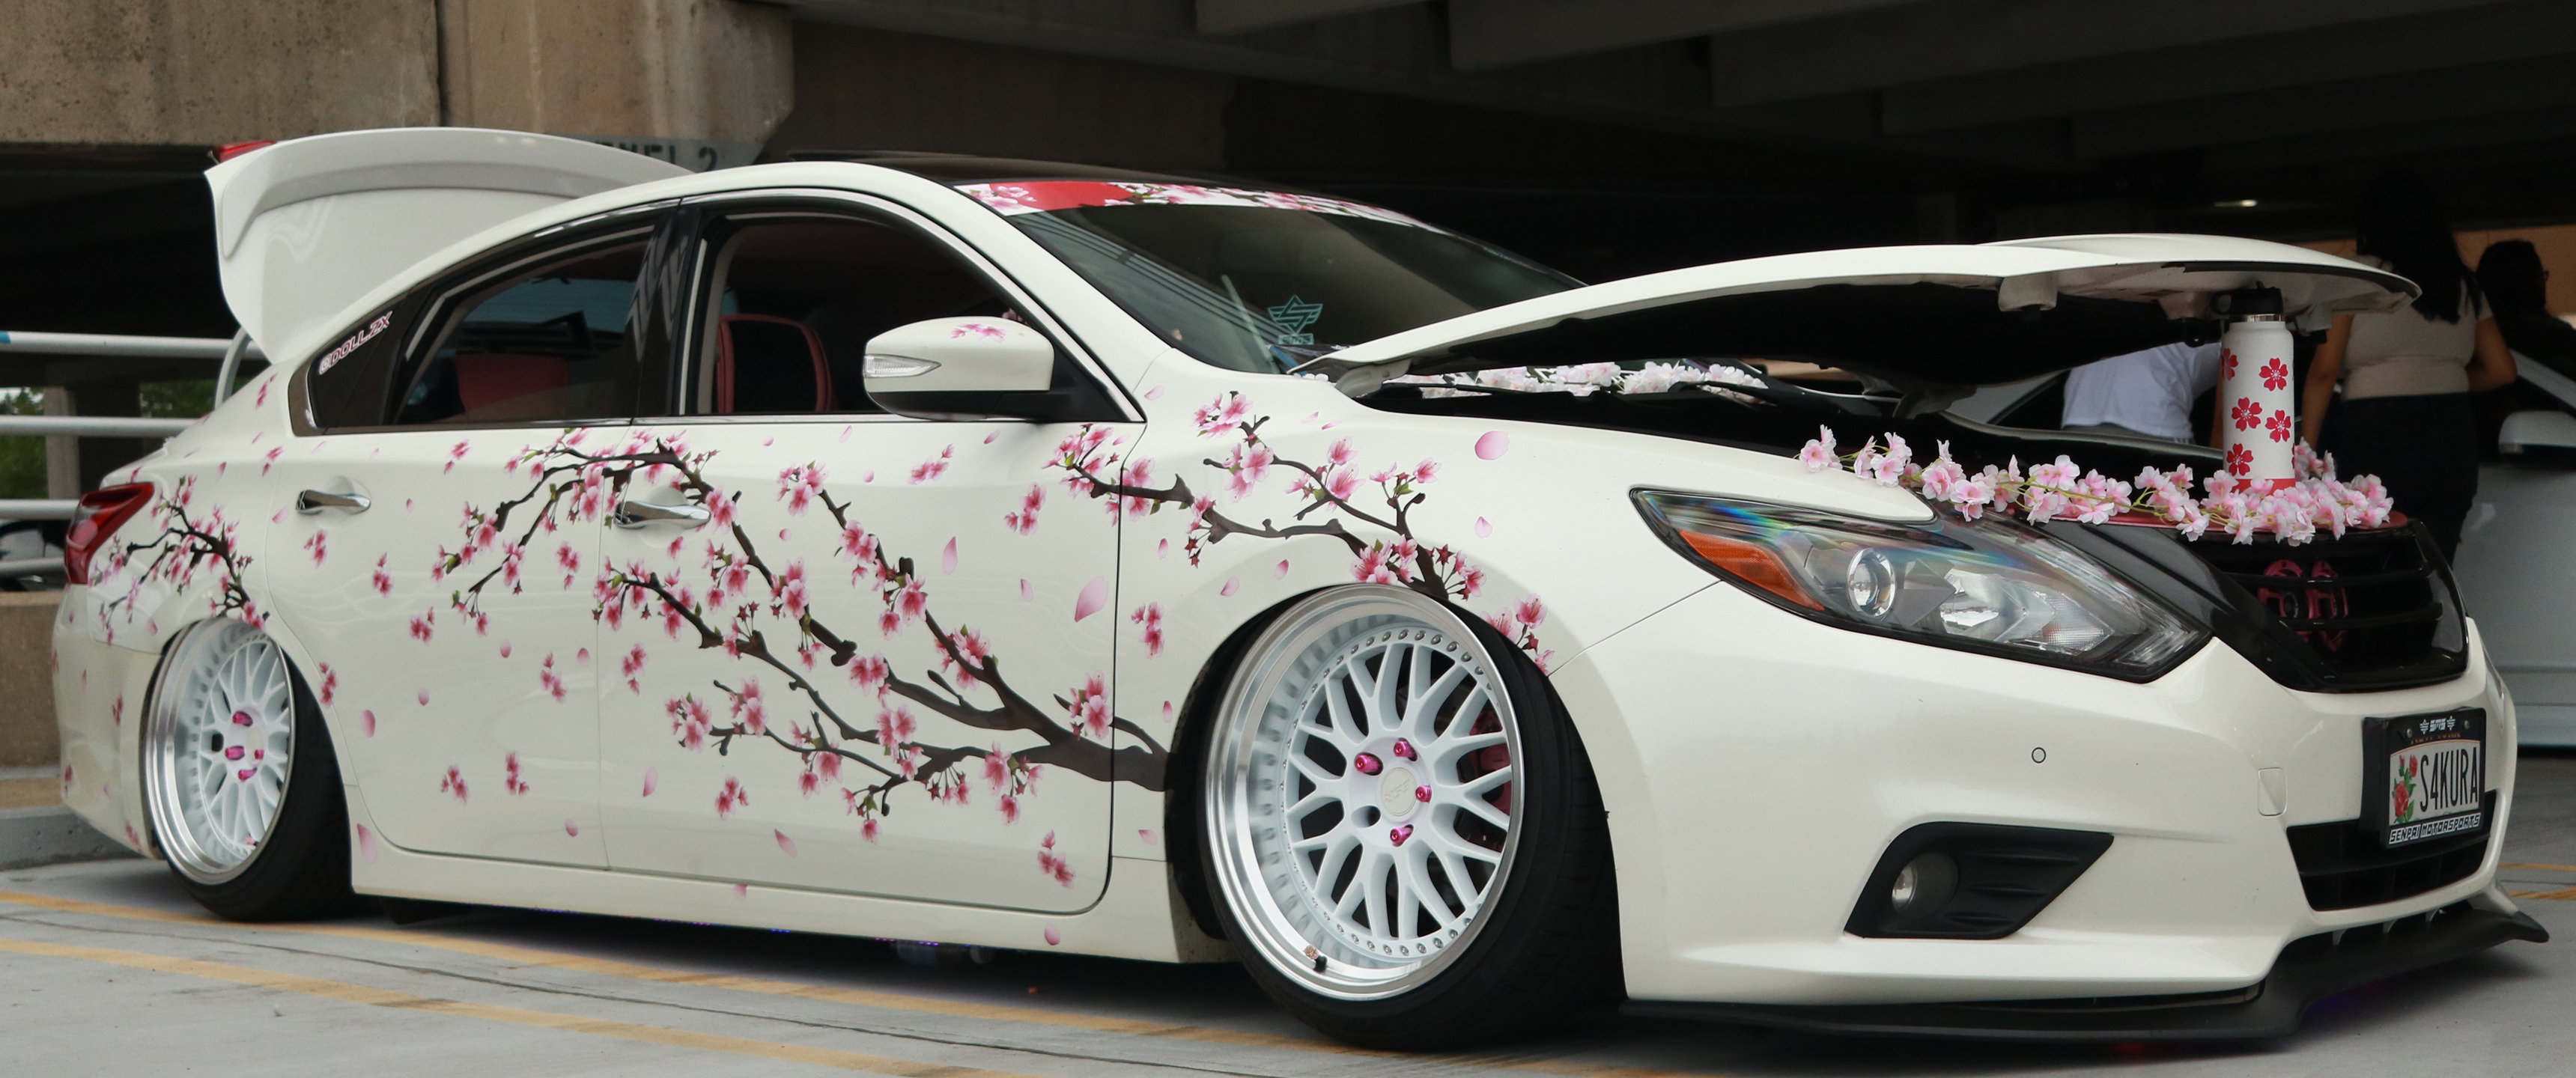 Car Lowered Photography Car Show Nissan Altima Orchards JDM Custom 3440x1440